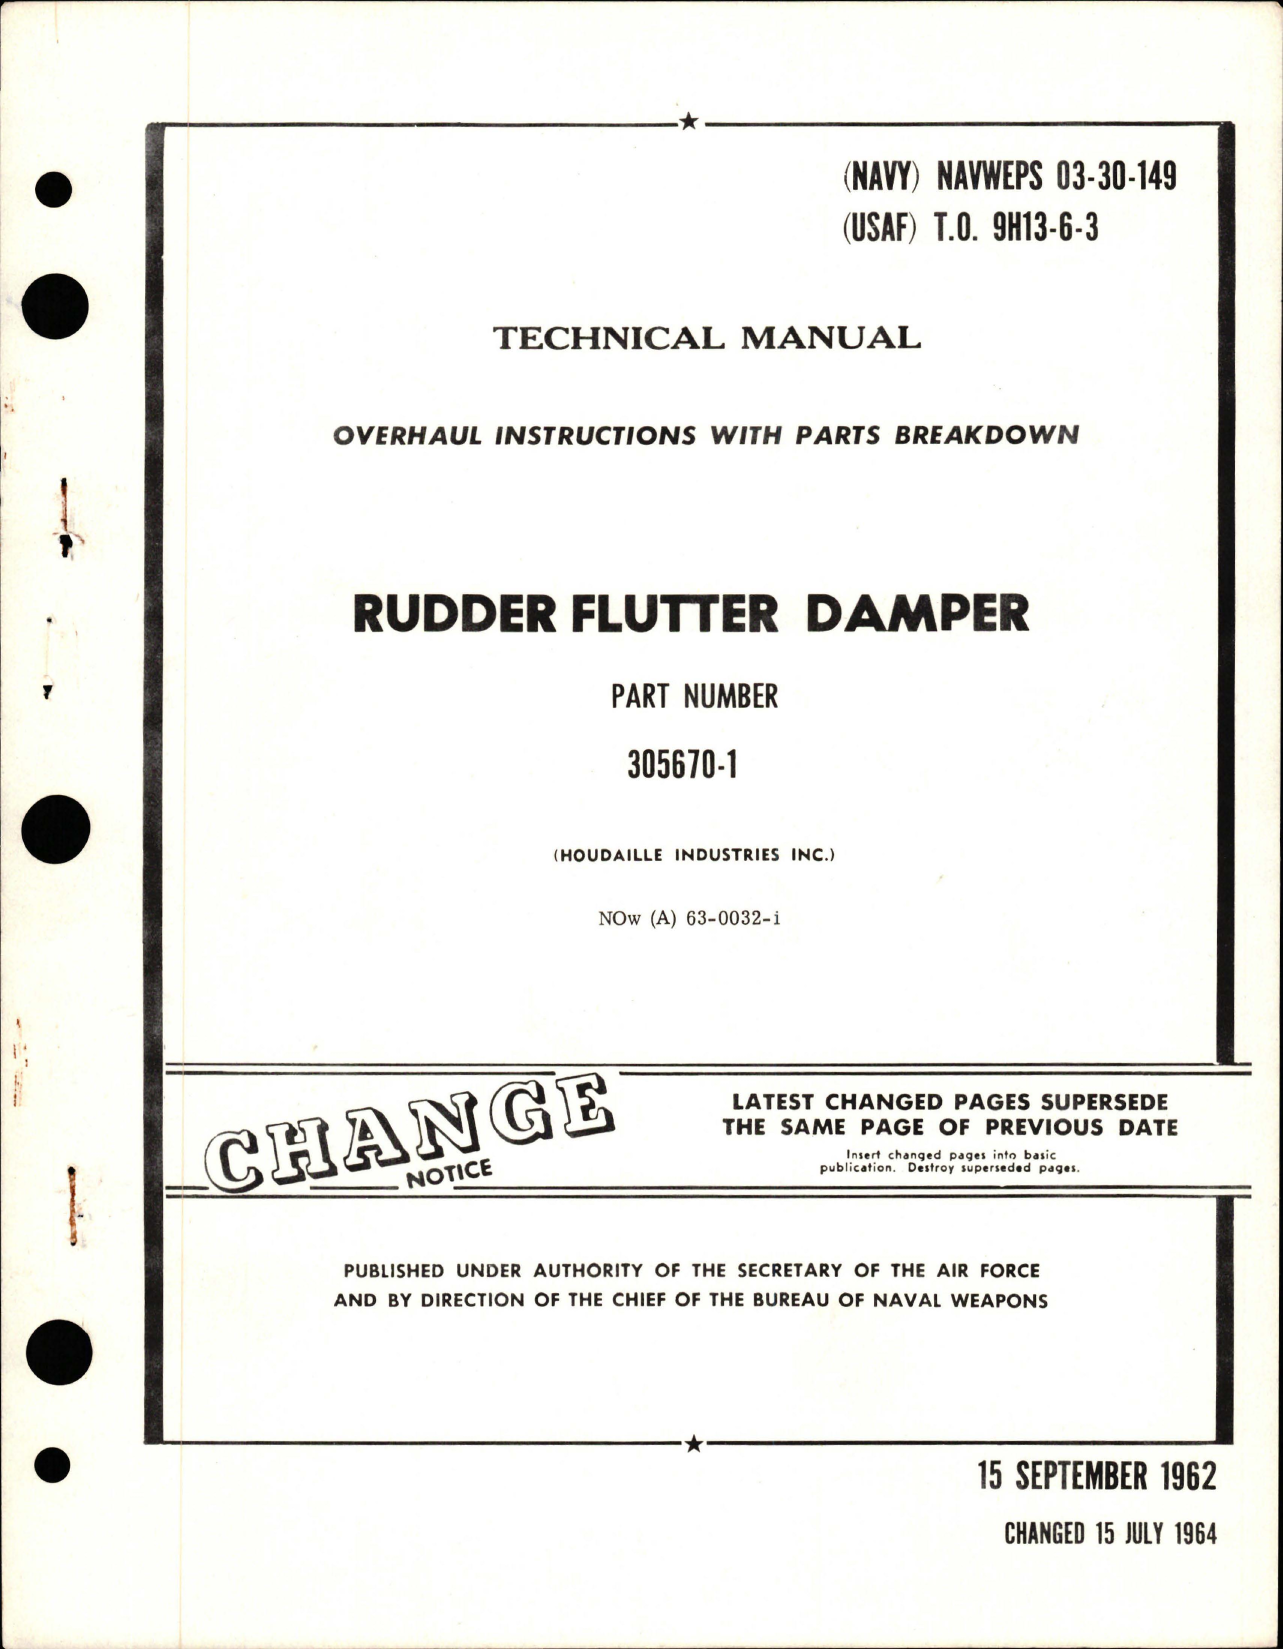 Sample page 1 from AirCorps Library document: Overhaul Instructions with Parts Breakdown for Rudder Flutter Damper - Part 305670-1 